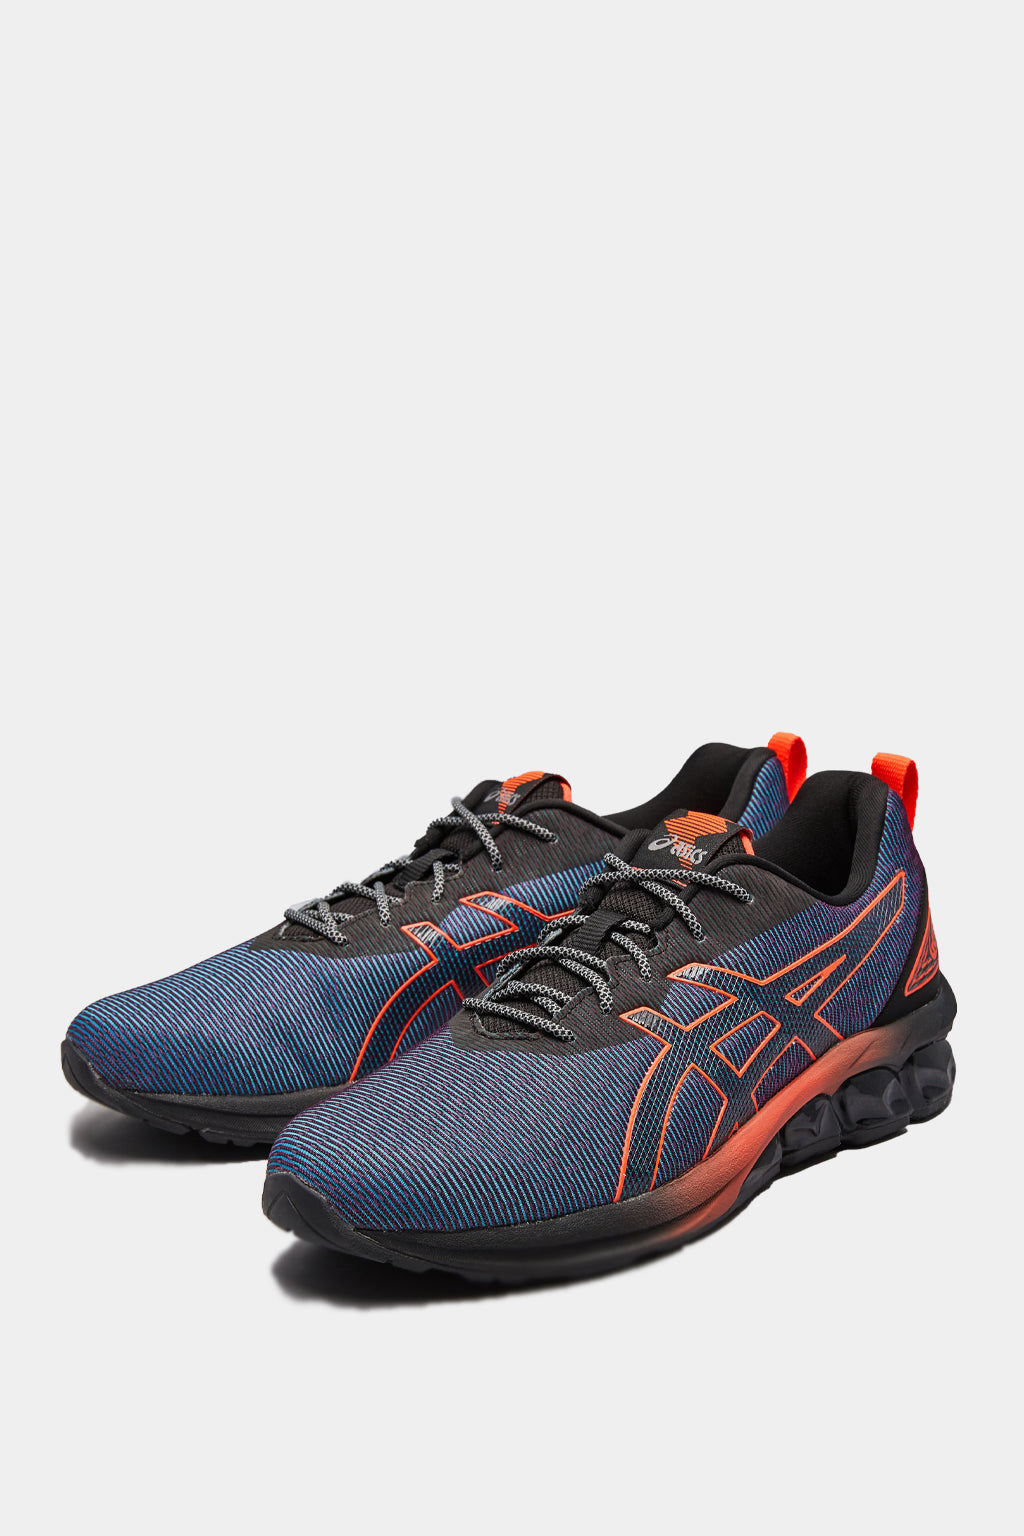 Asics - Gel Quantum 180 Vii Holiday Sportstyle Shoes